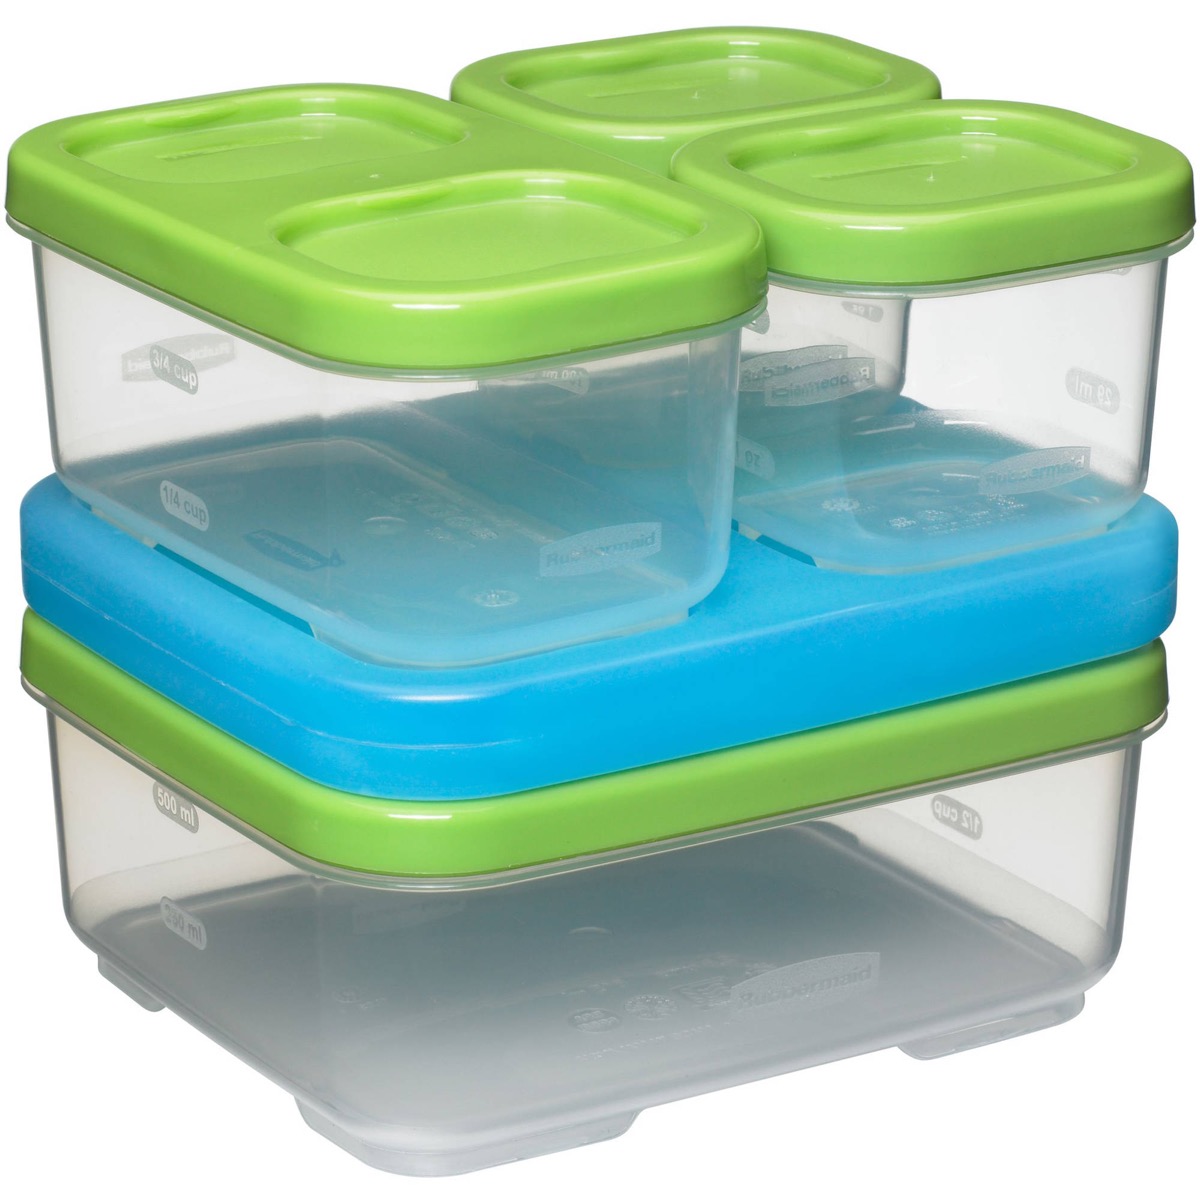 meal prep containers with green and blue lids, cheap meal prep containers